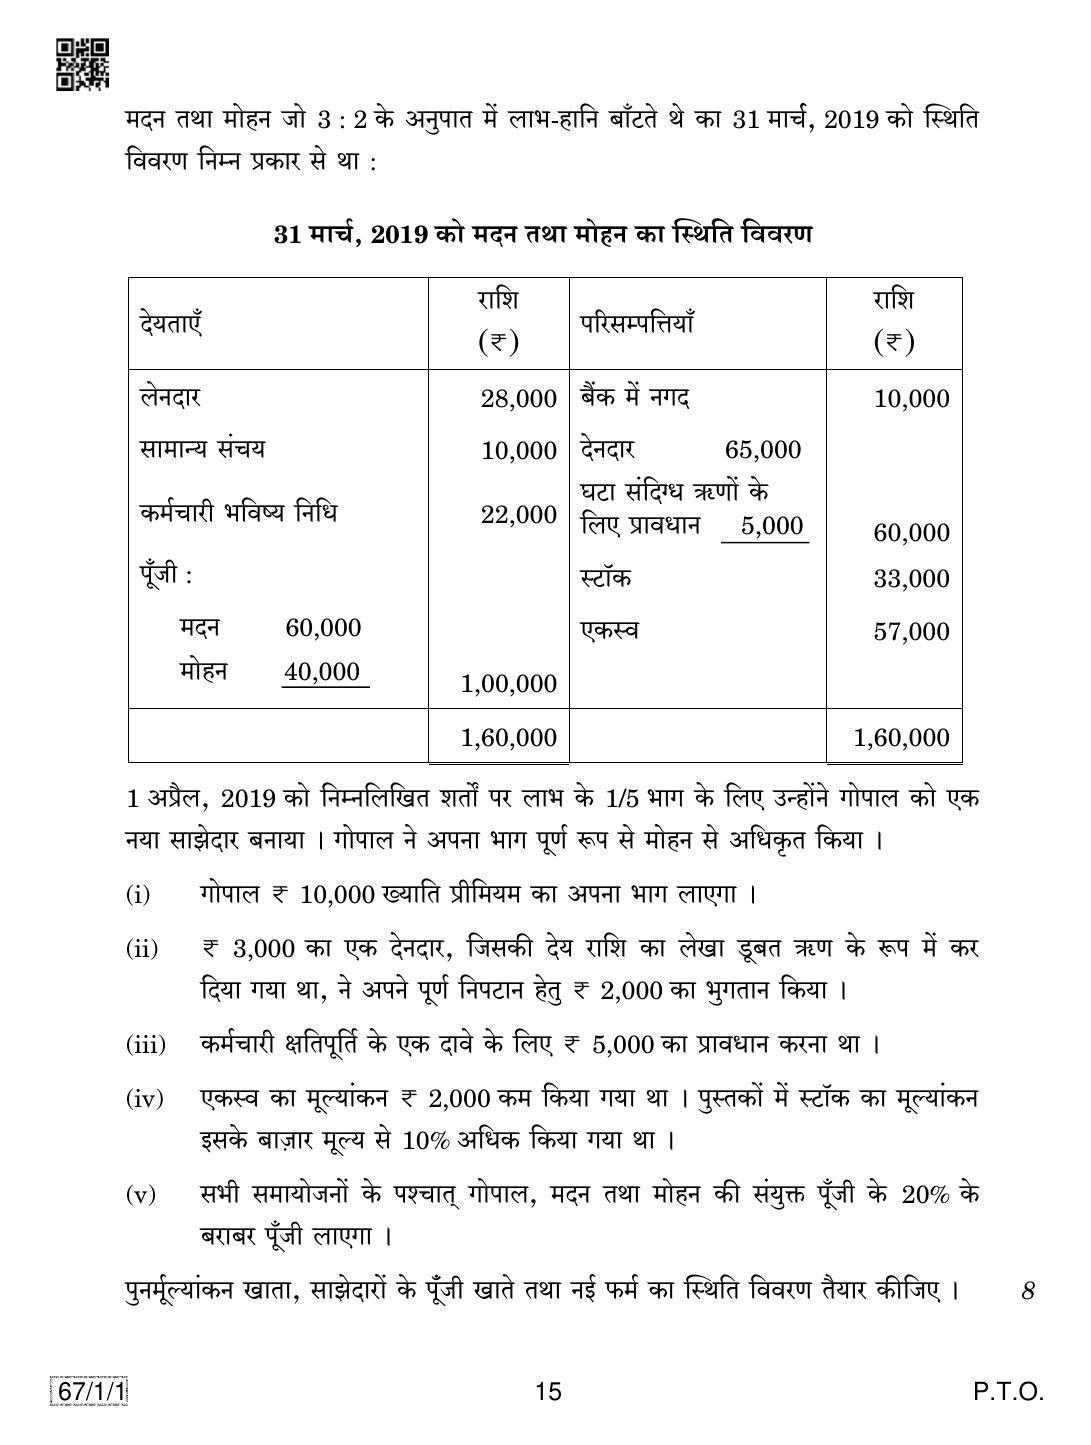 CBSE Class 12 67-1-1 ACCOUNTANCY 2019 Compartment Question Paper - Page 15